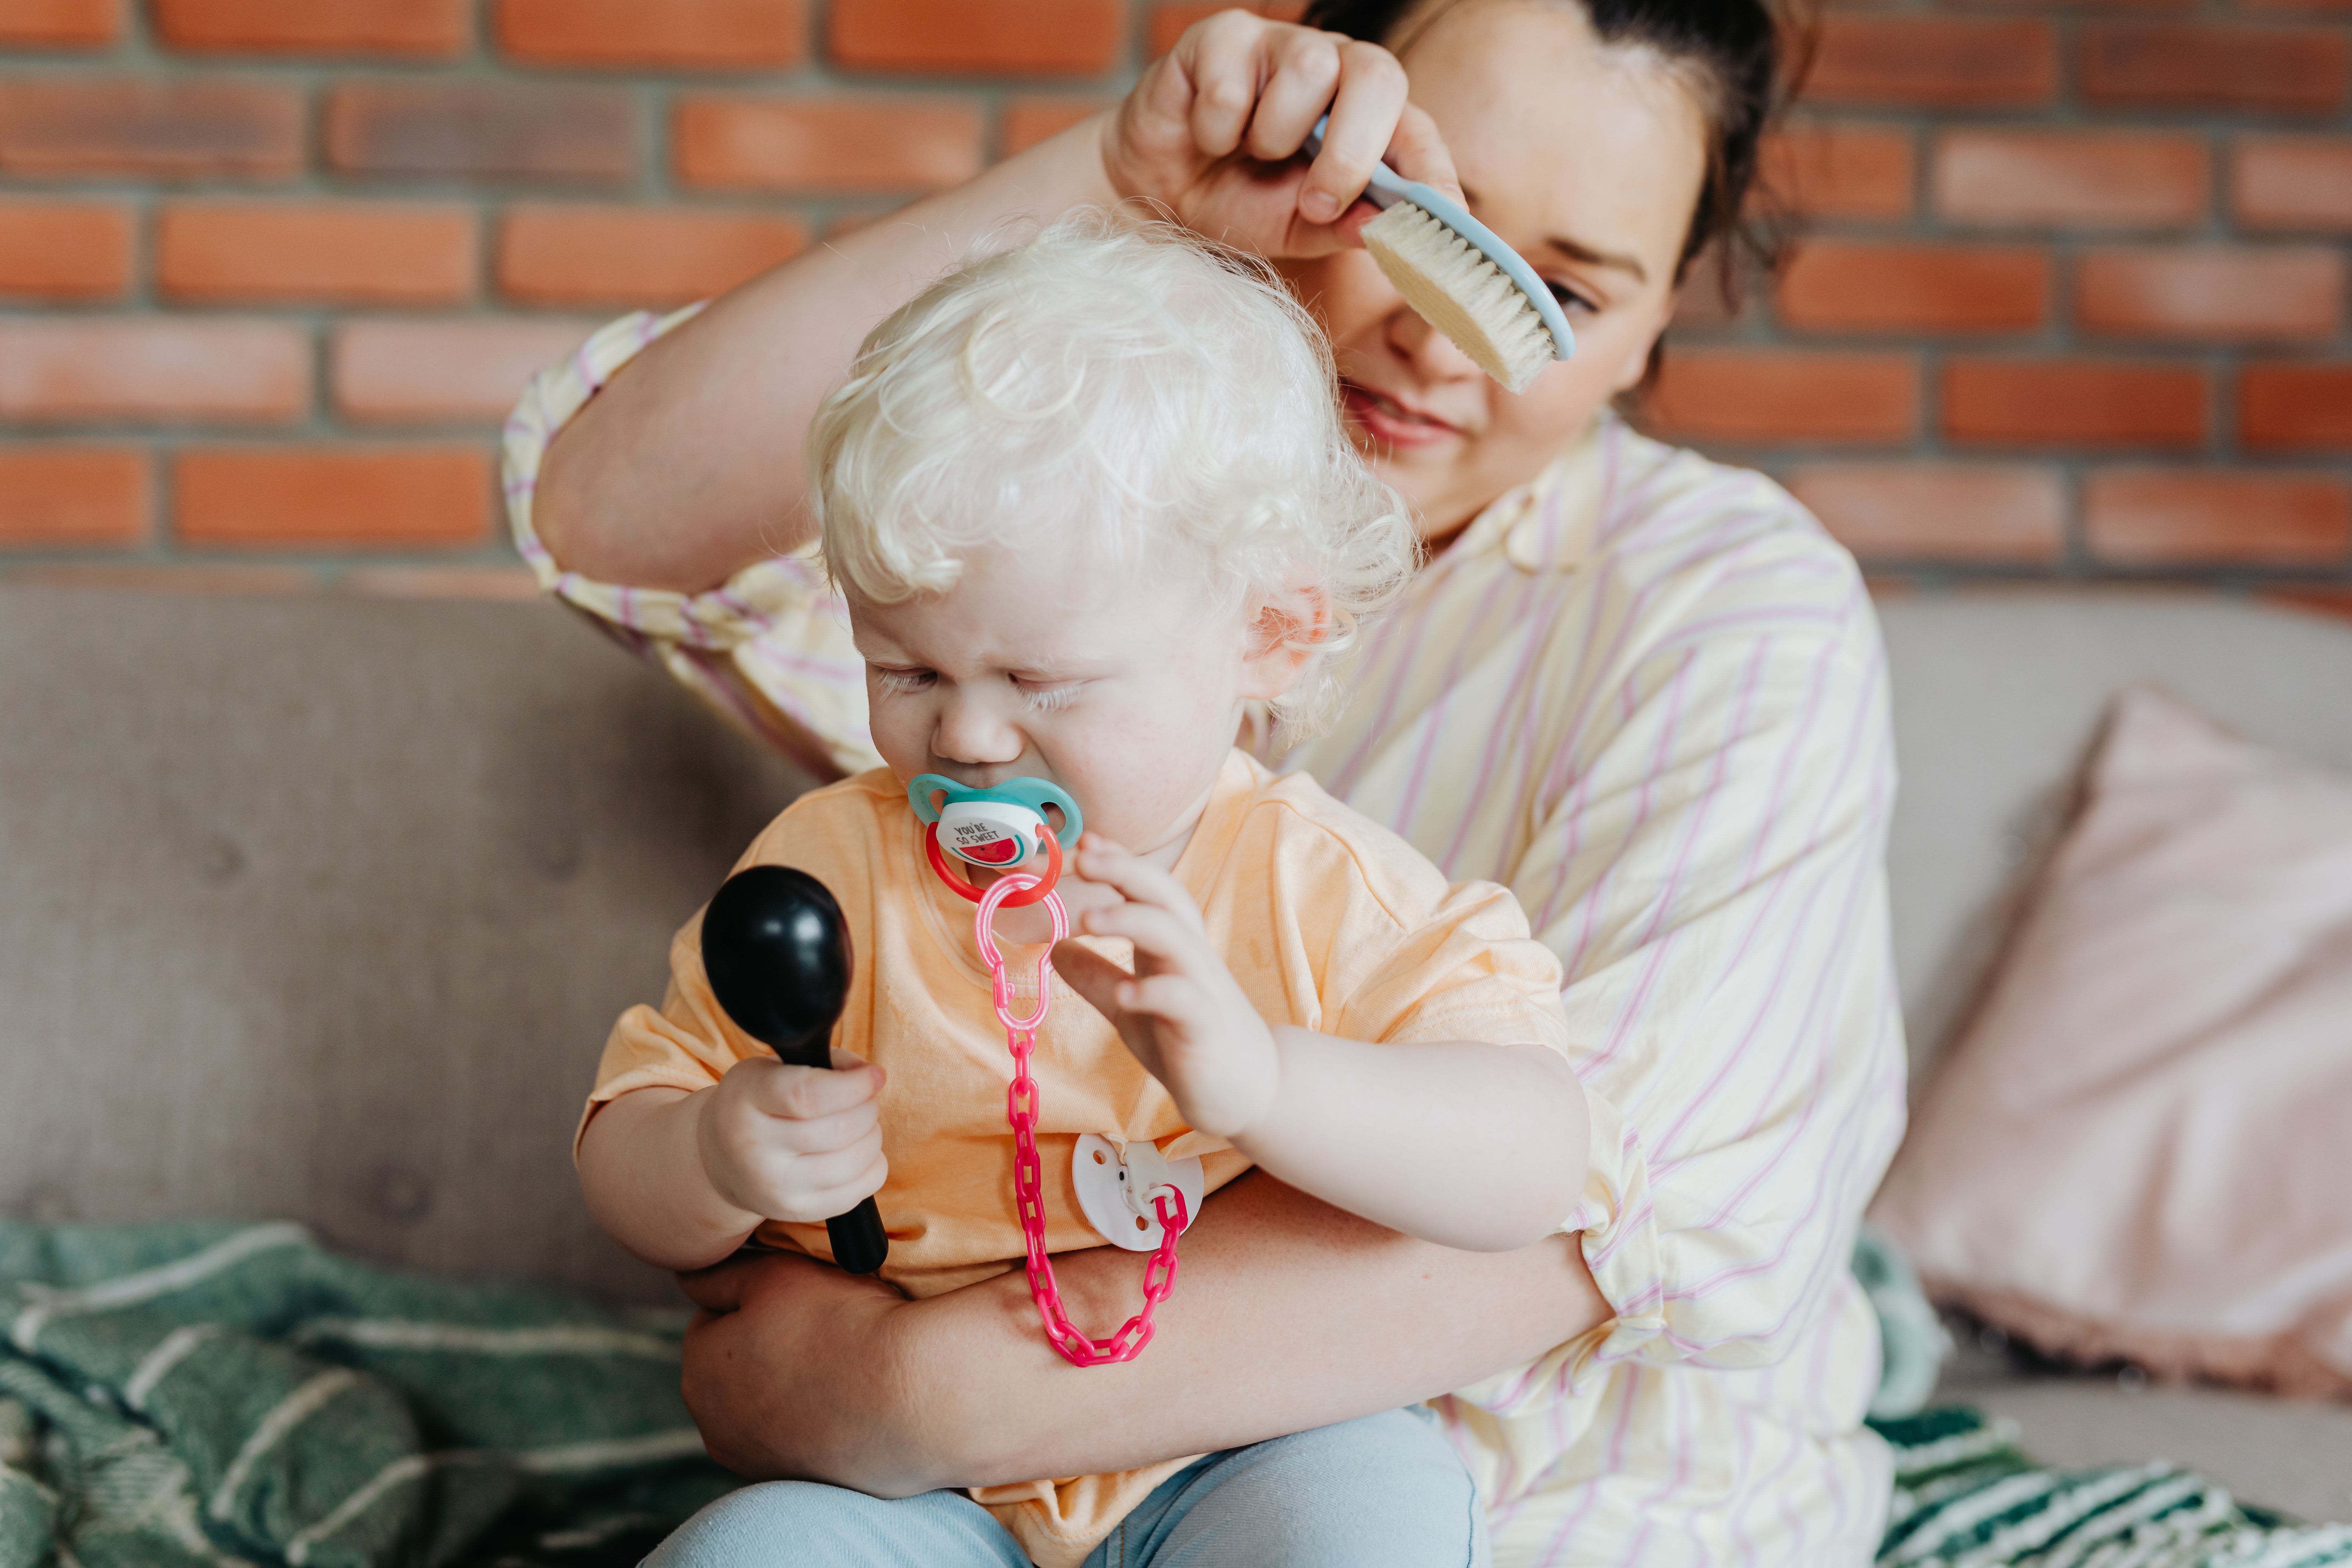 A mother caring for her child | Source: Pexels